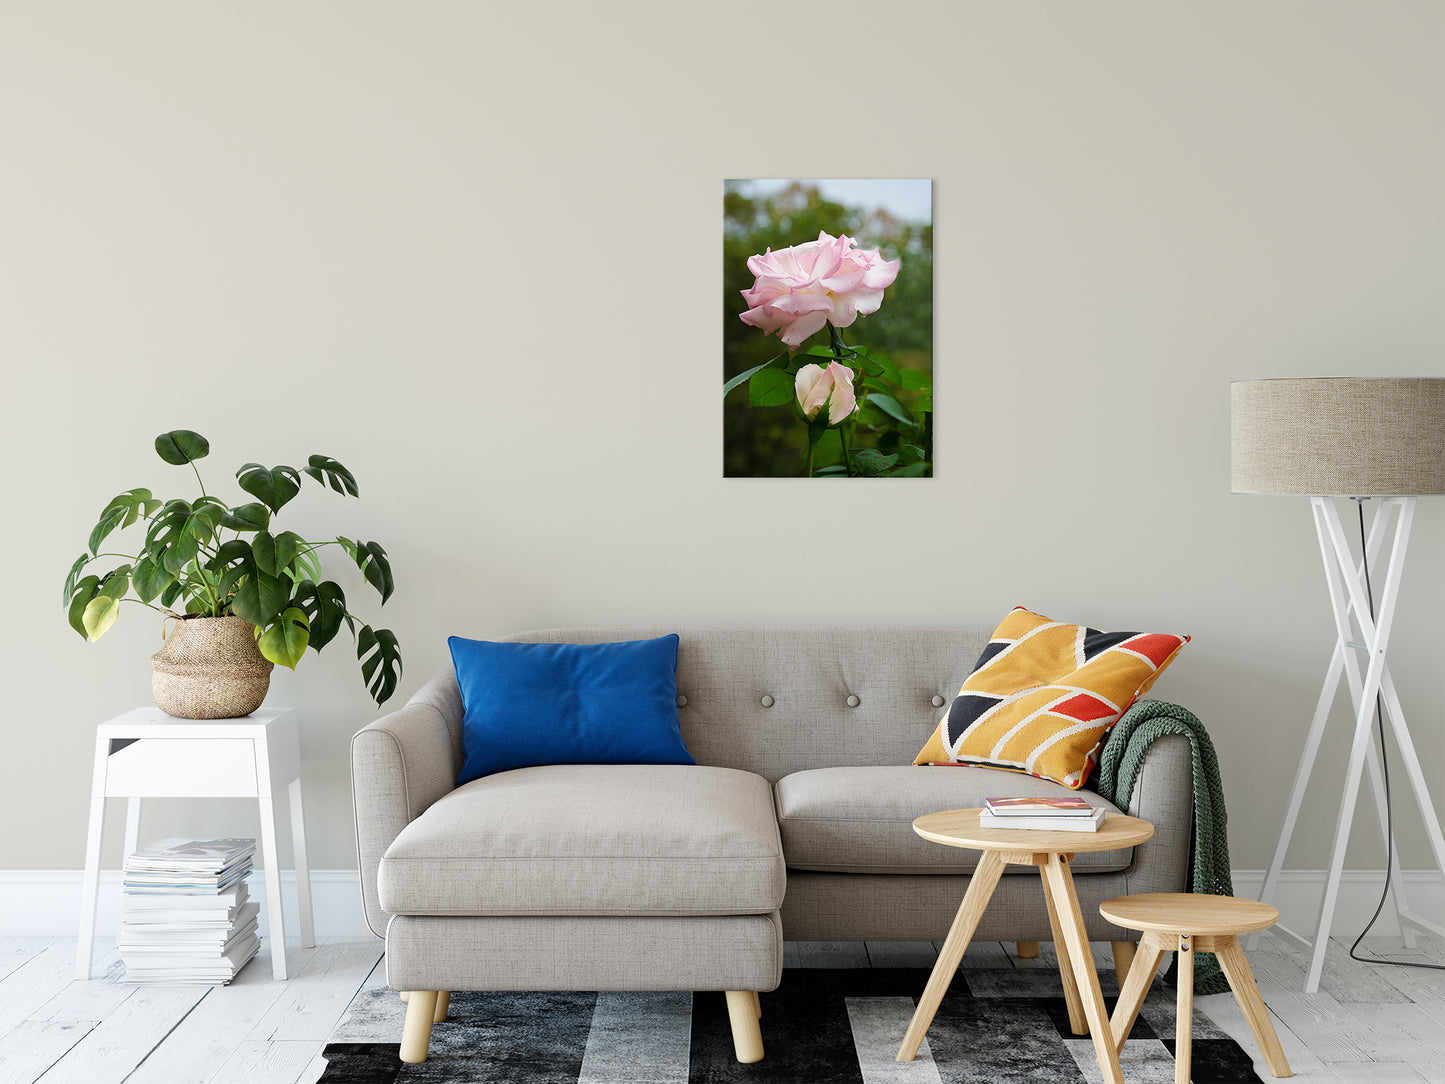 Pink Flower Prints For Wall: Admiration Nature / Floral Photo Fine Art Canvas Wall Art Prints 20" x 30" - PIPAFINEART